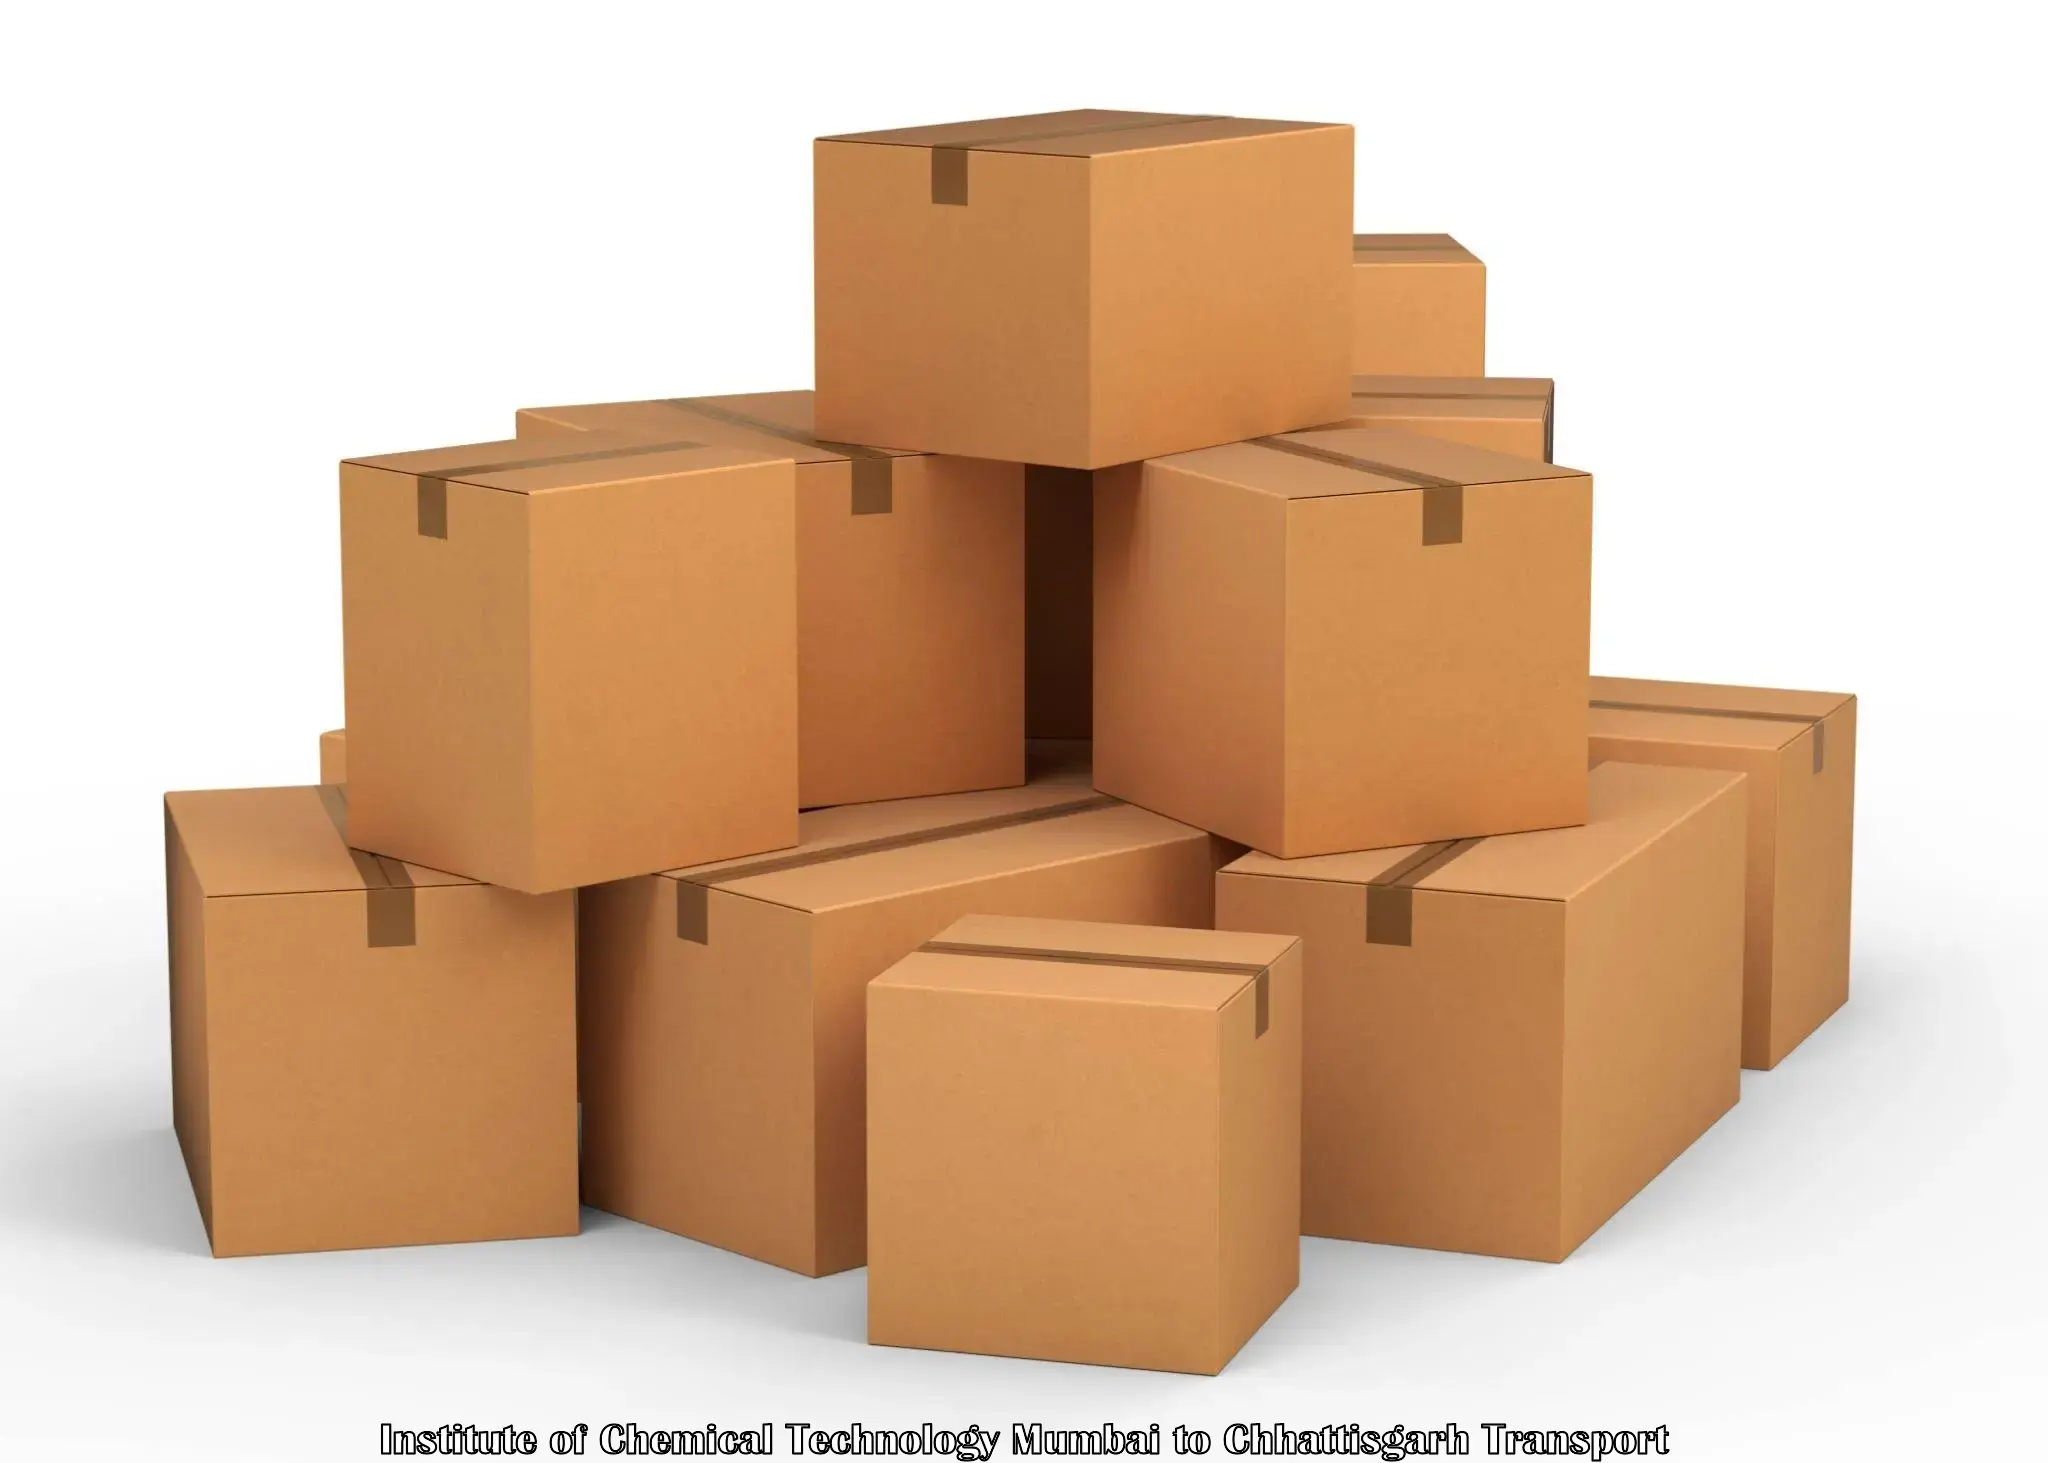 Parcel transport services Institute of Chemical Technology Mumbai to Chhattisgarh